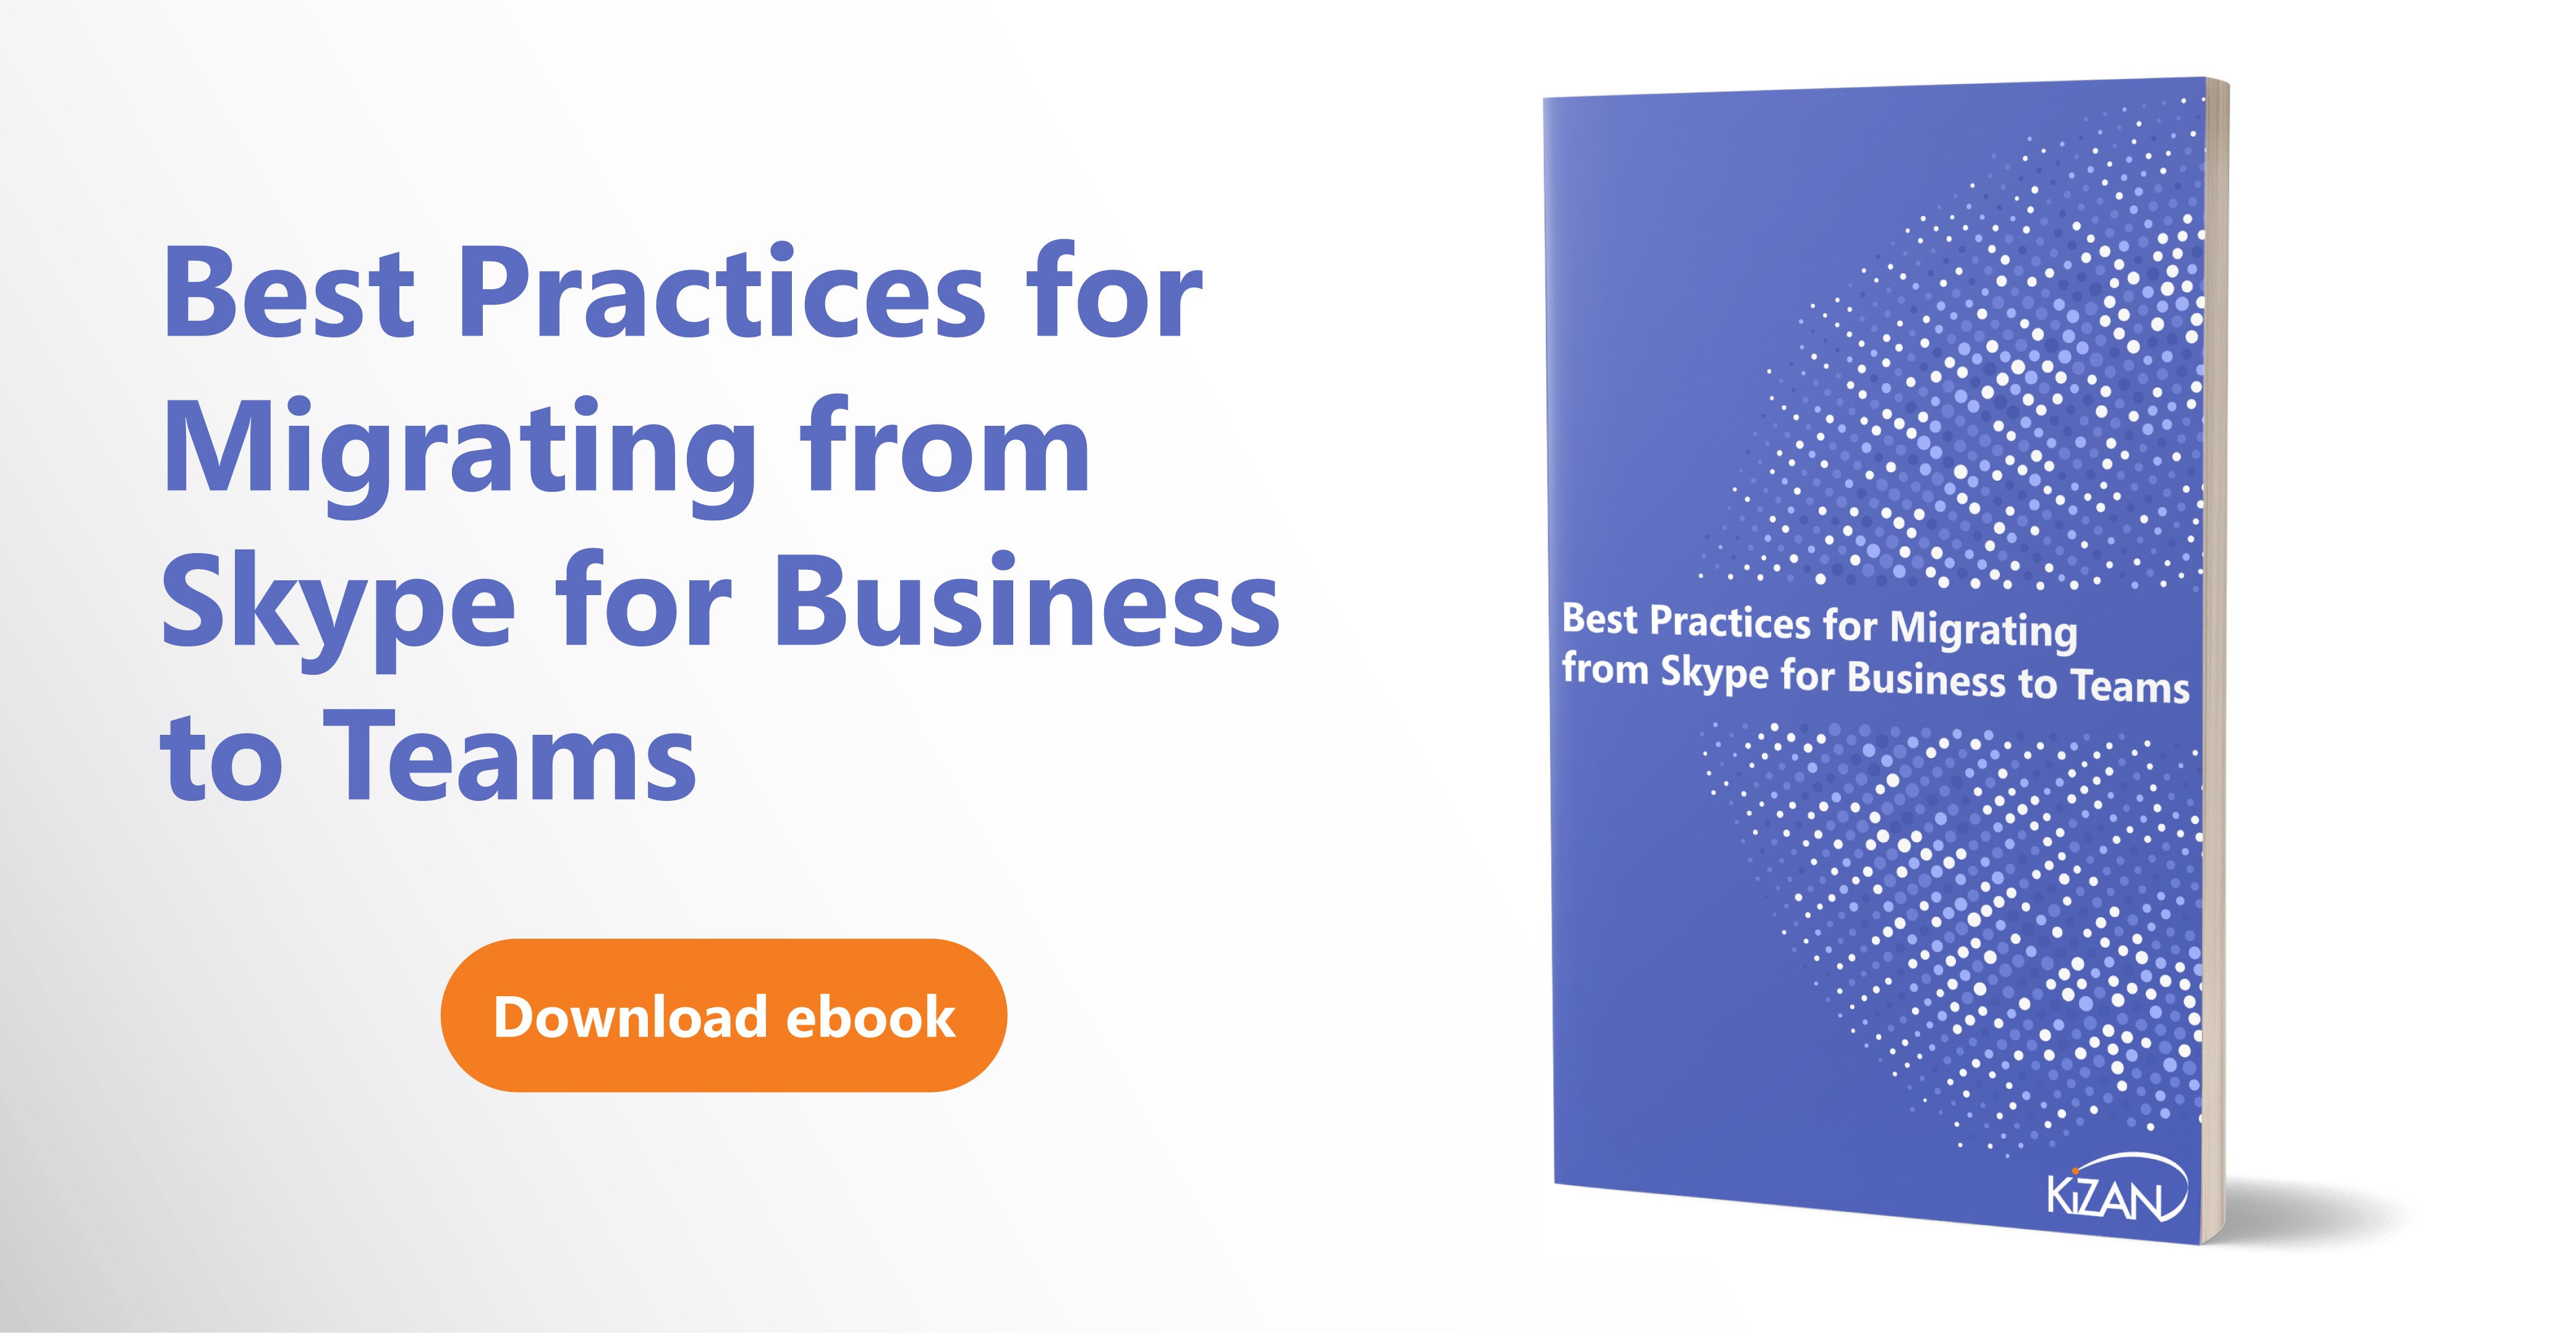 Best Practices for Migrating from Skype for Business to Teams ebook